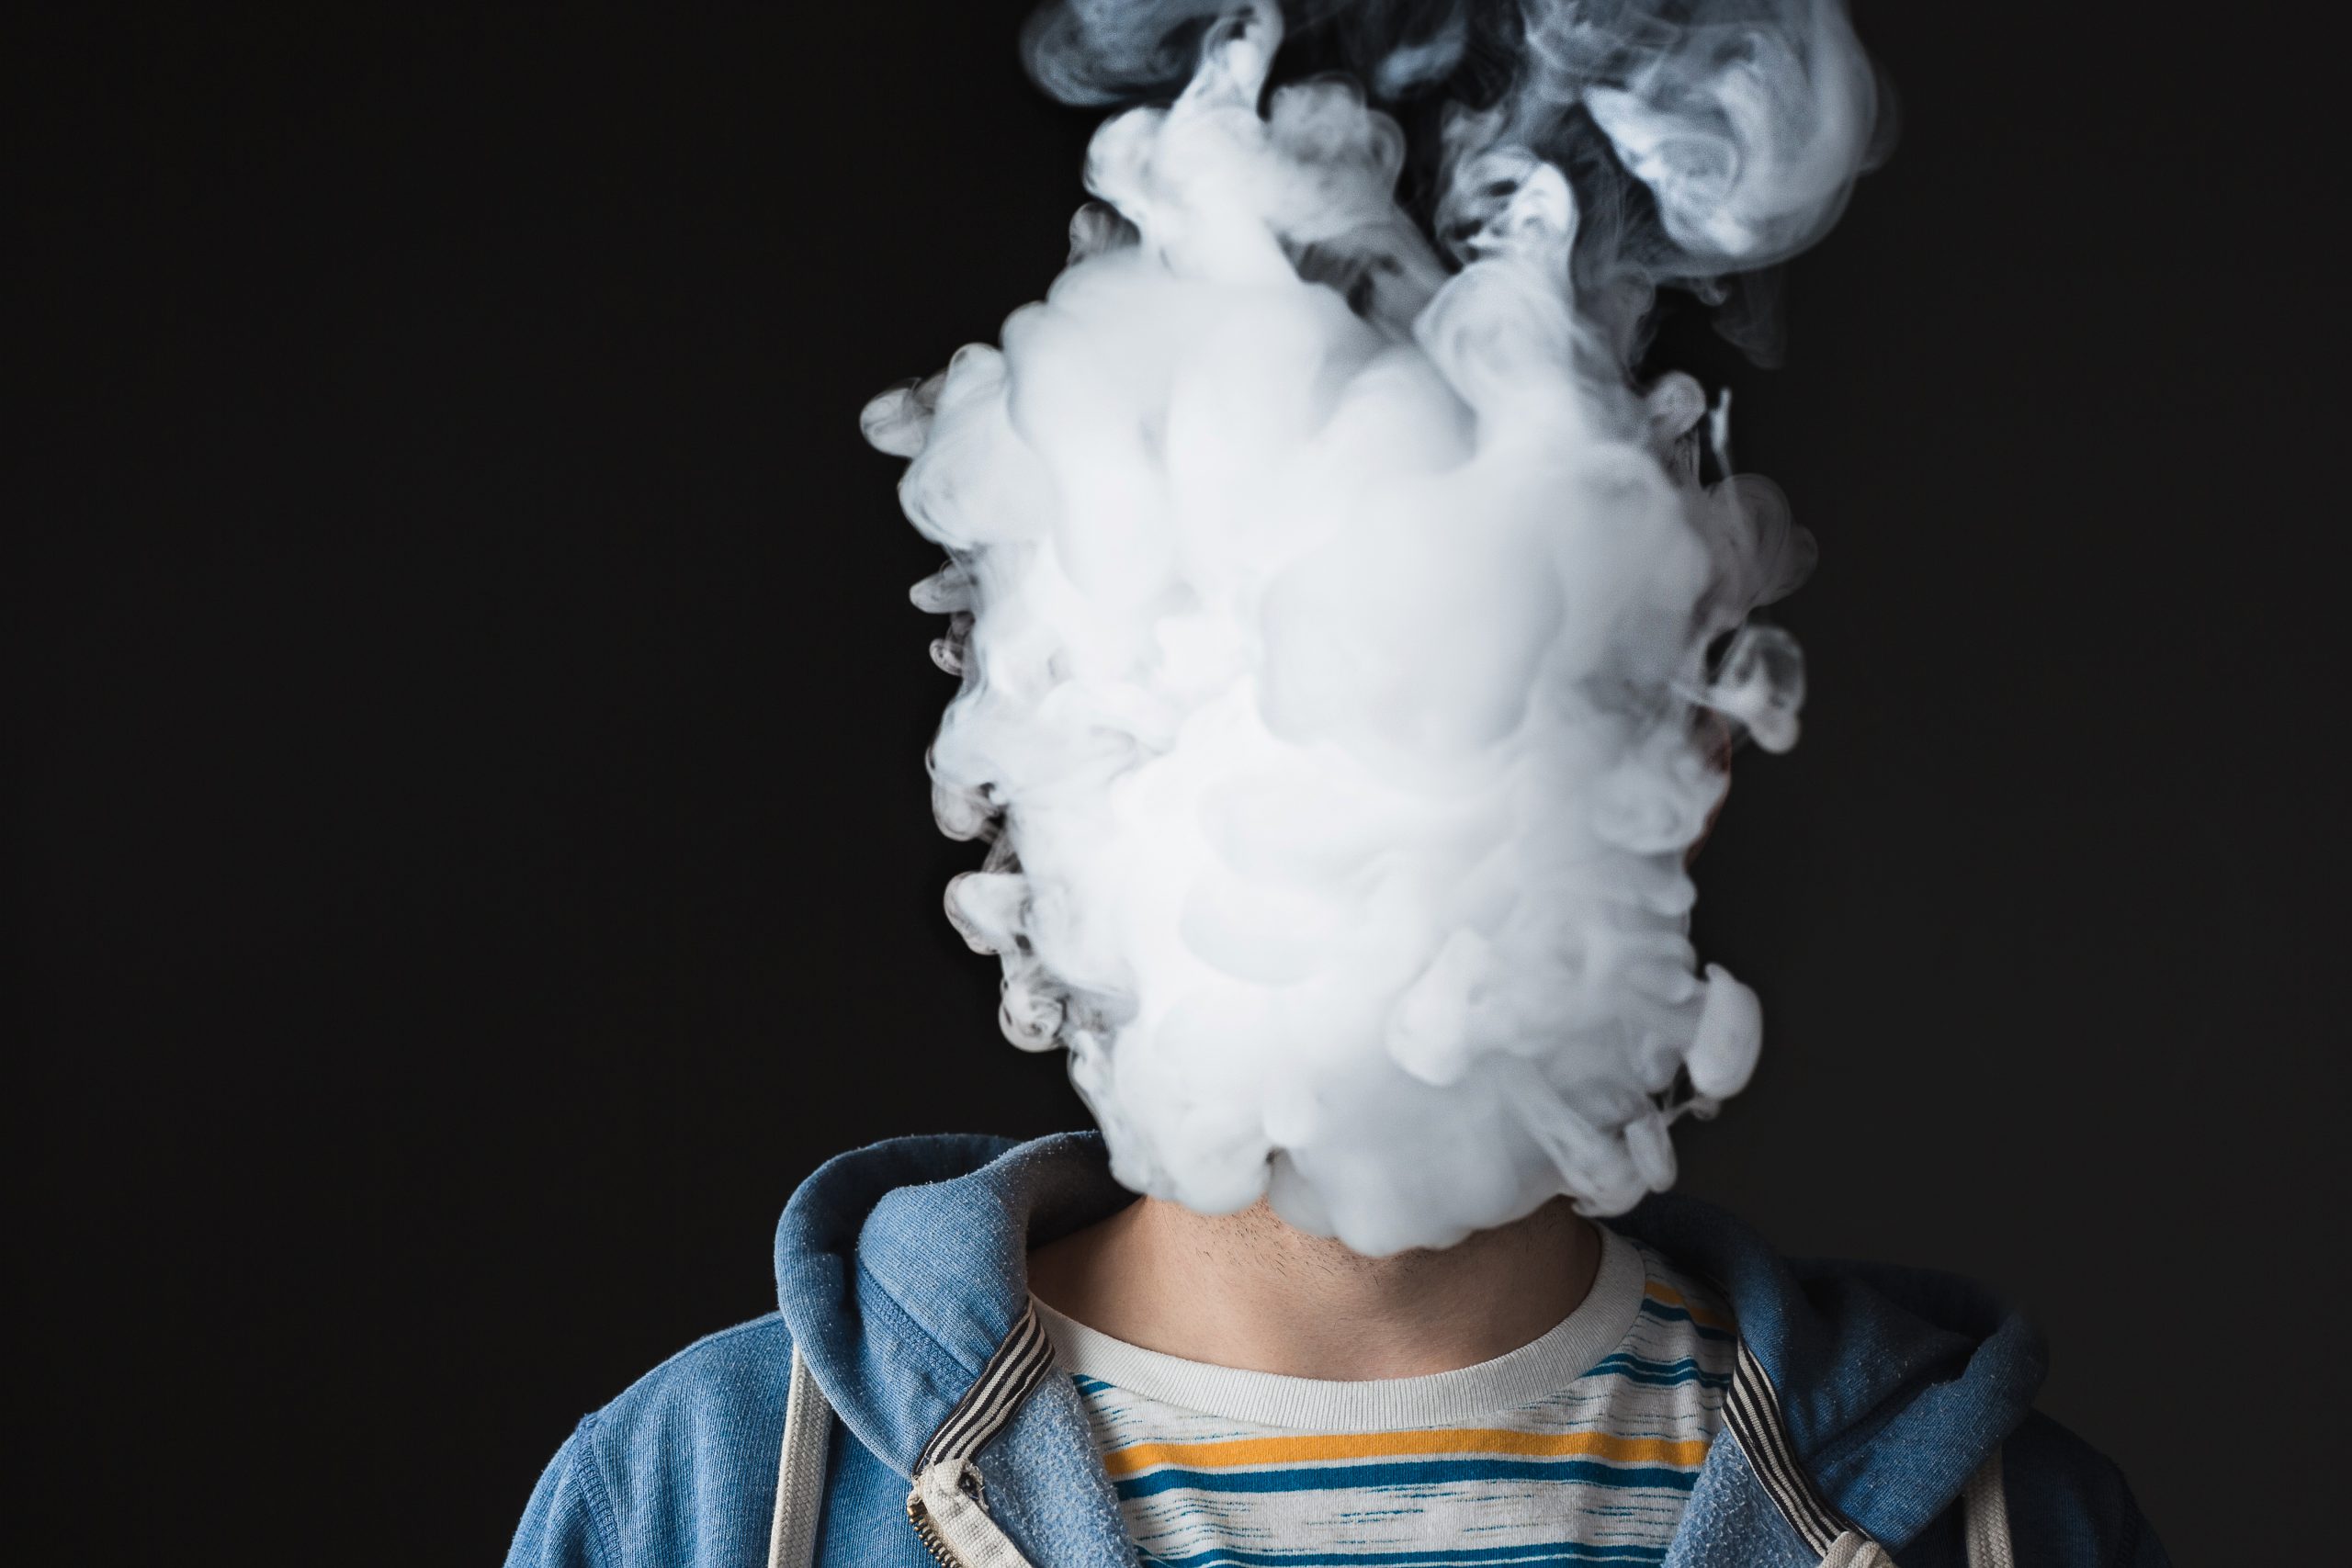 Vaping: Facts, Fiction, and Valuable Information for Parents